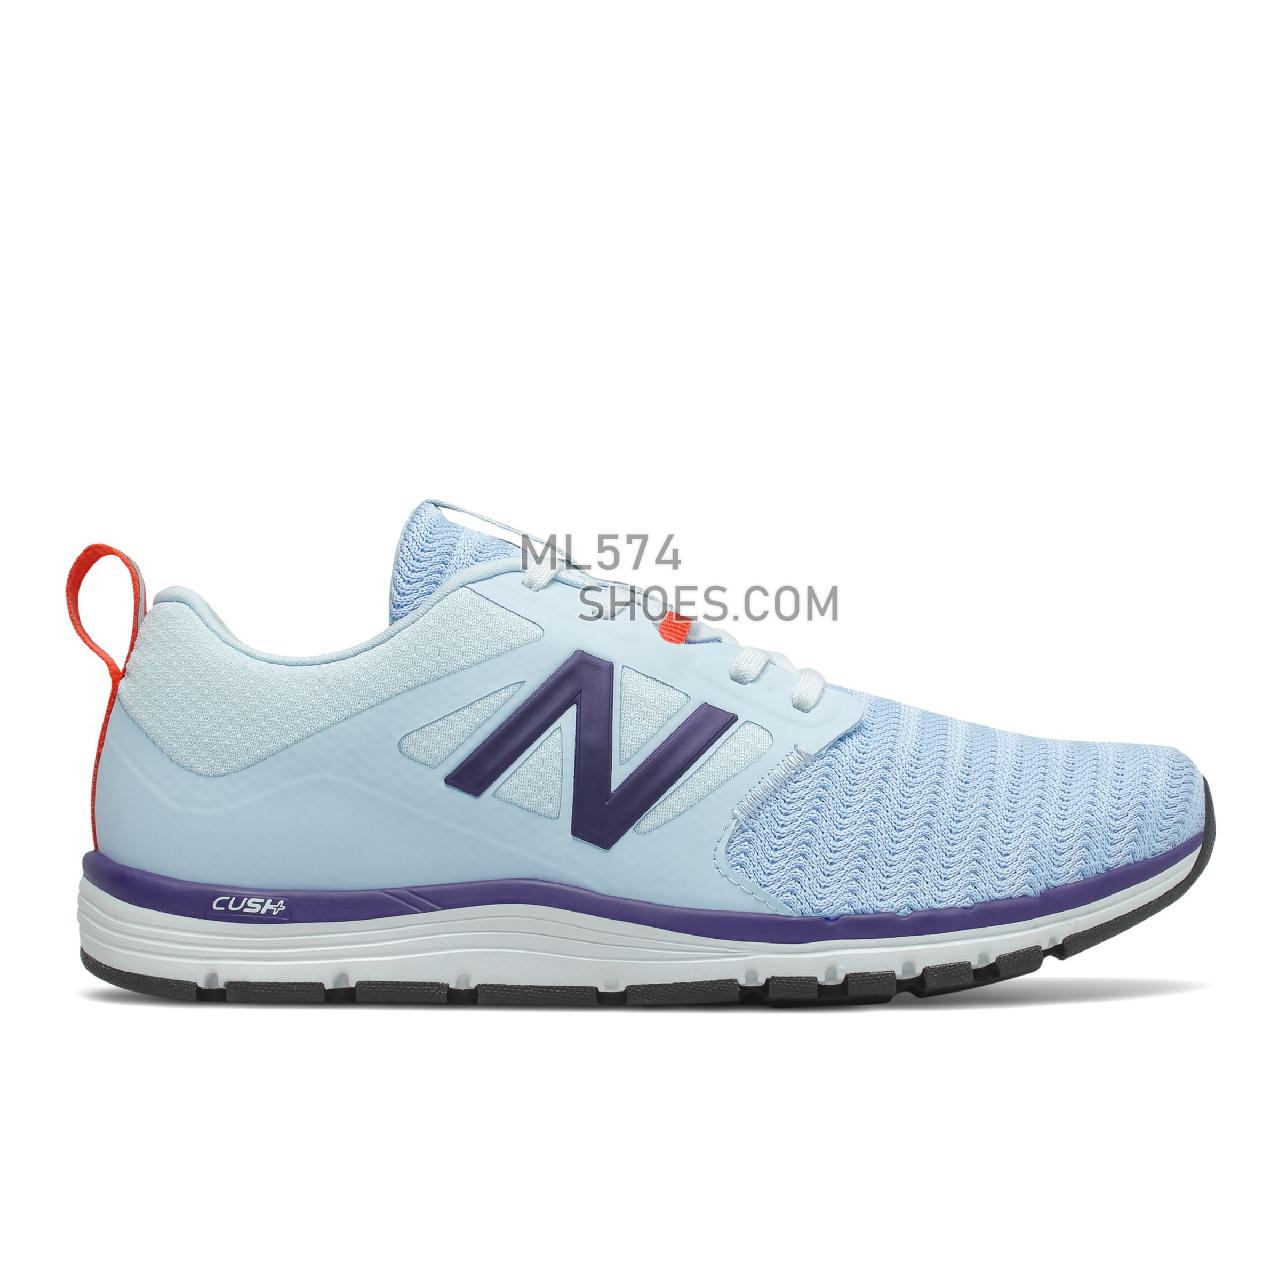 New Balance 577v5 - Women's Workout - Uv Glo with Virtual Violet - WX577US5